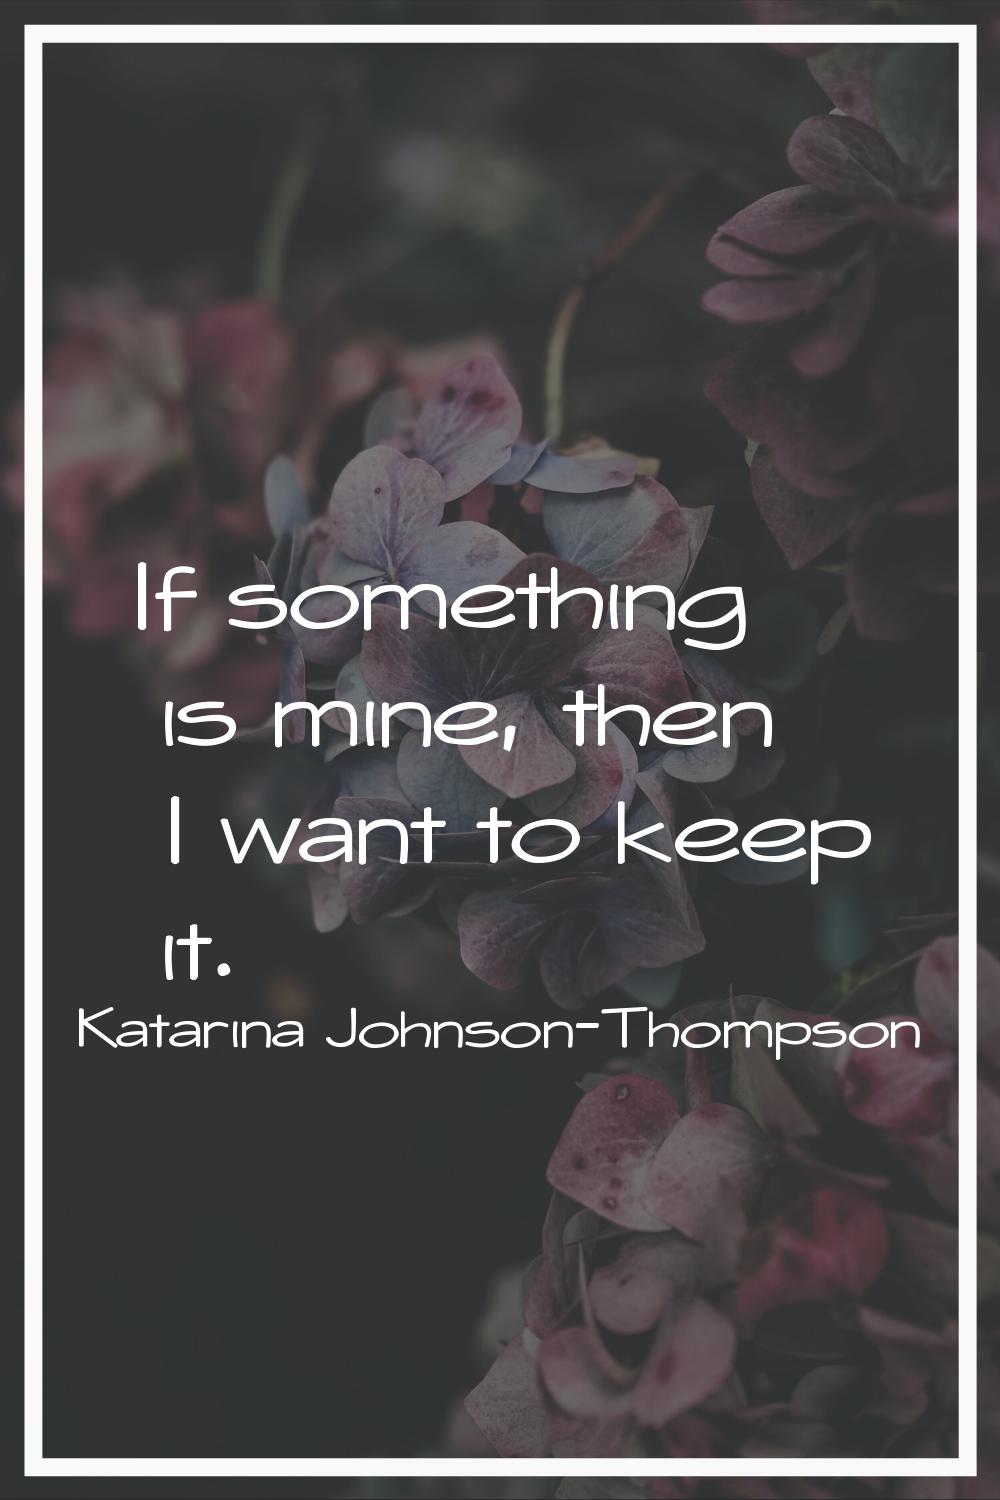 If something is mine, then I want to keep it.